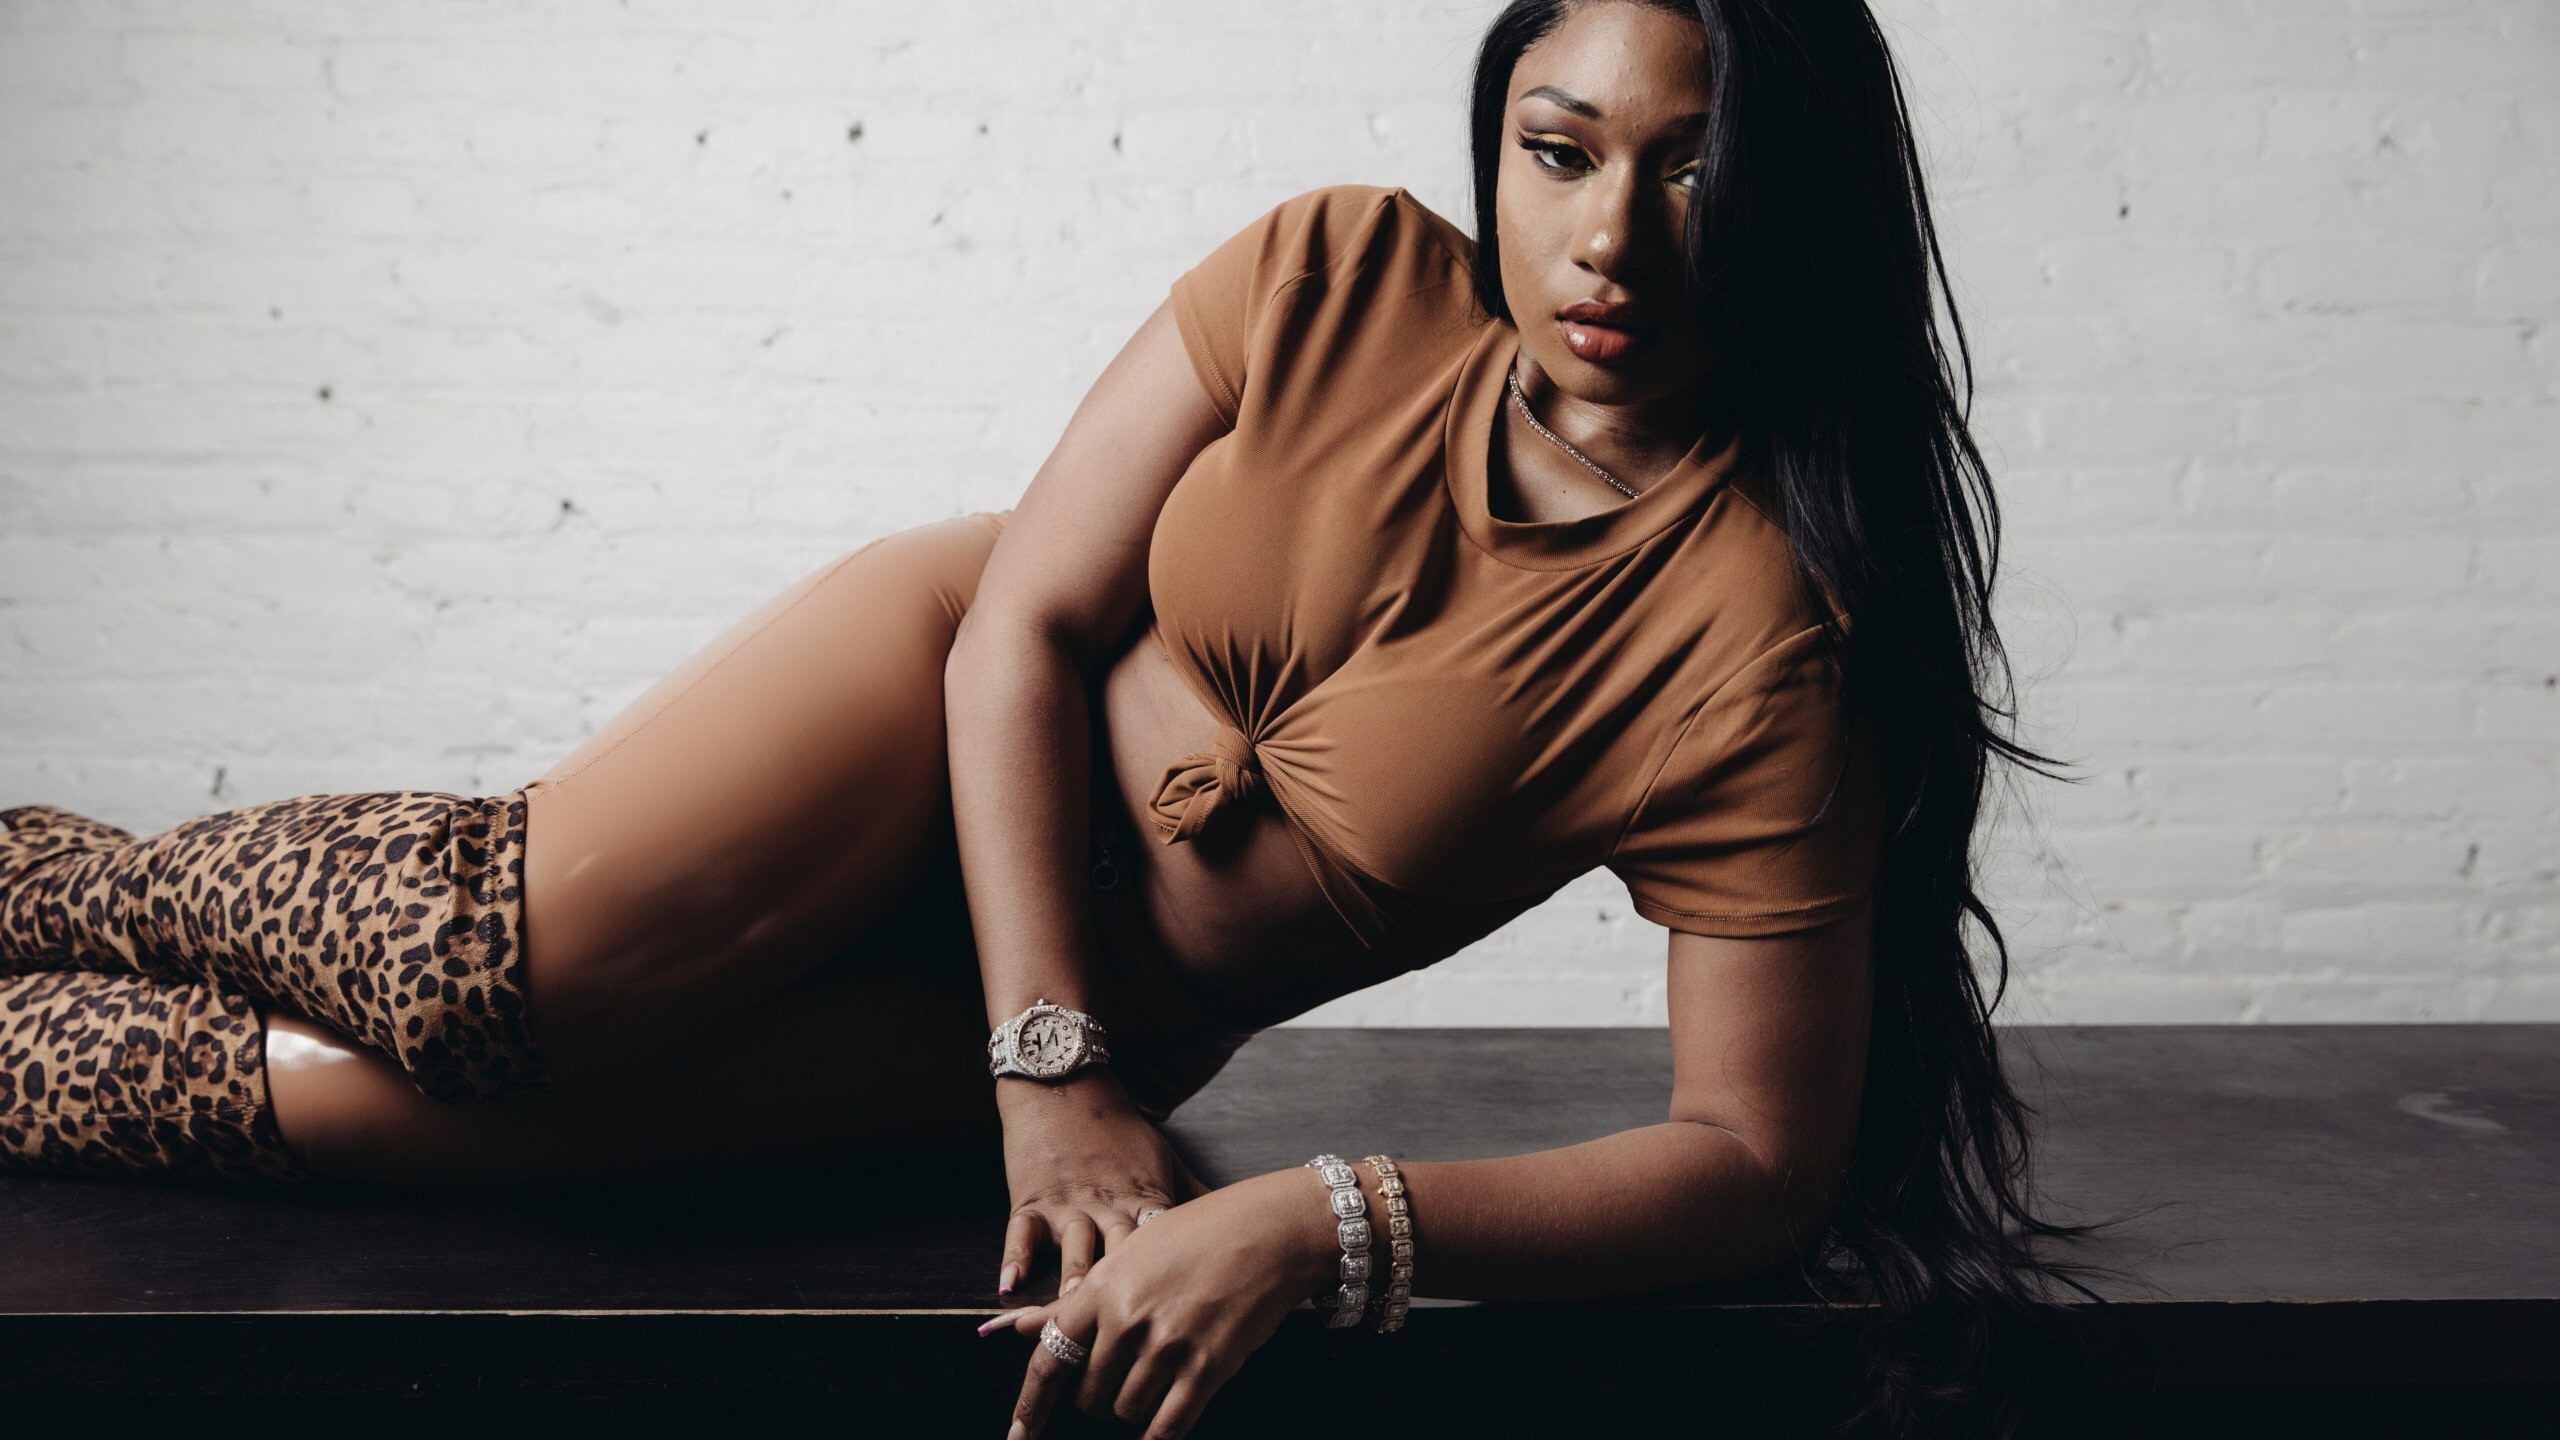 Megan Thee Stallion: The single "Savage" become the singer's first chart-topper in the United States. 2560x1440 HD Wallpaper.